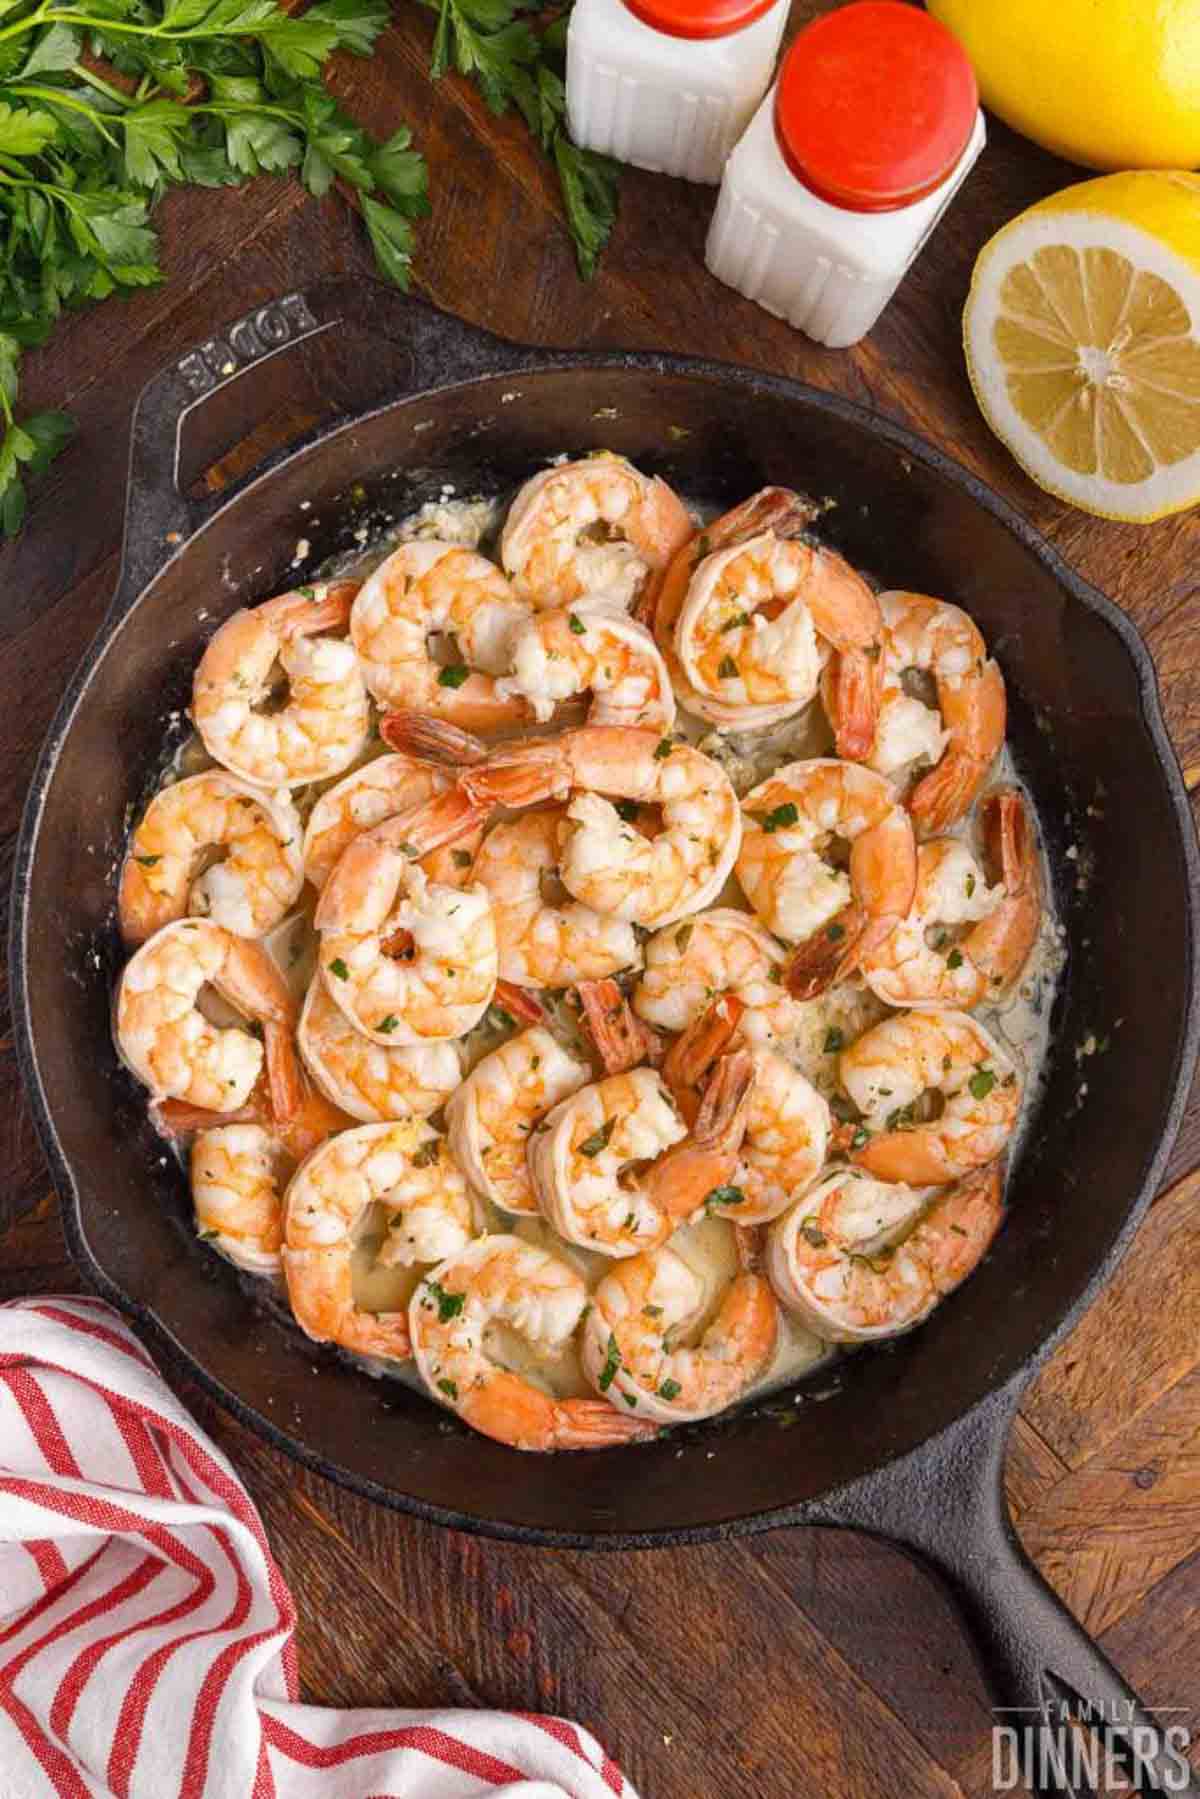 Lemon garlic shrimp cooked in a cast iron skillet until pink and curled.